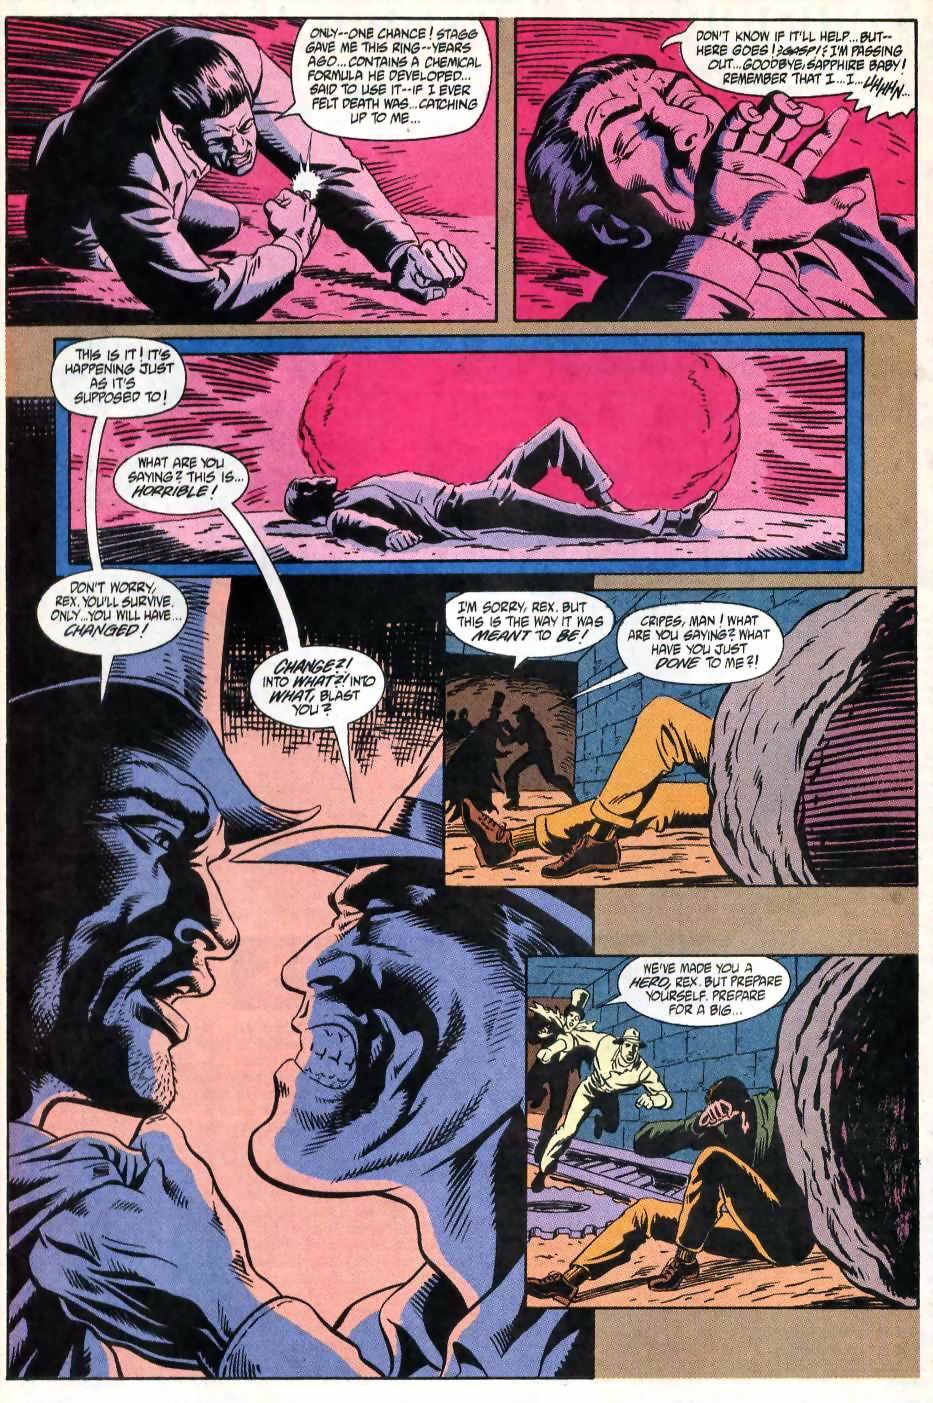 Justice League International (1993) 59 Page 22